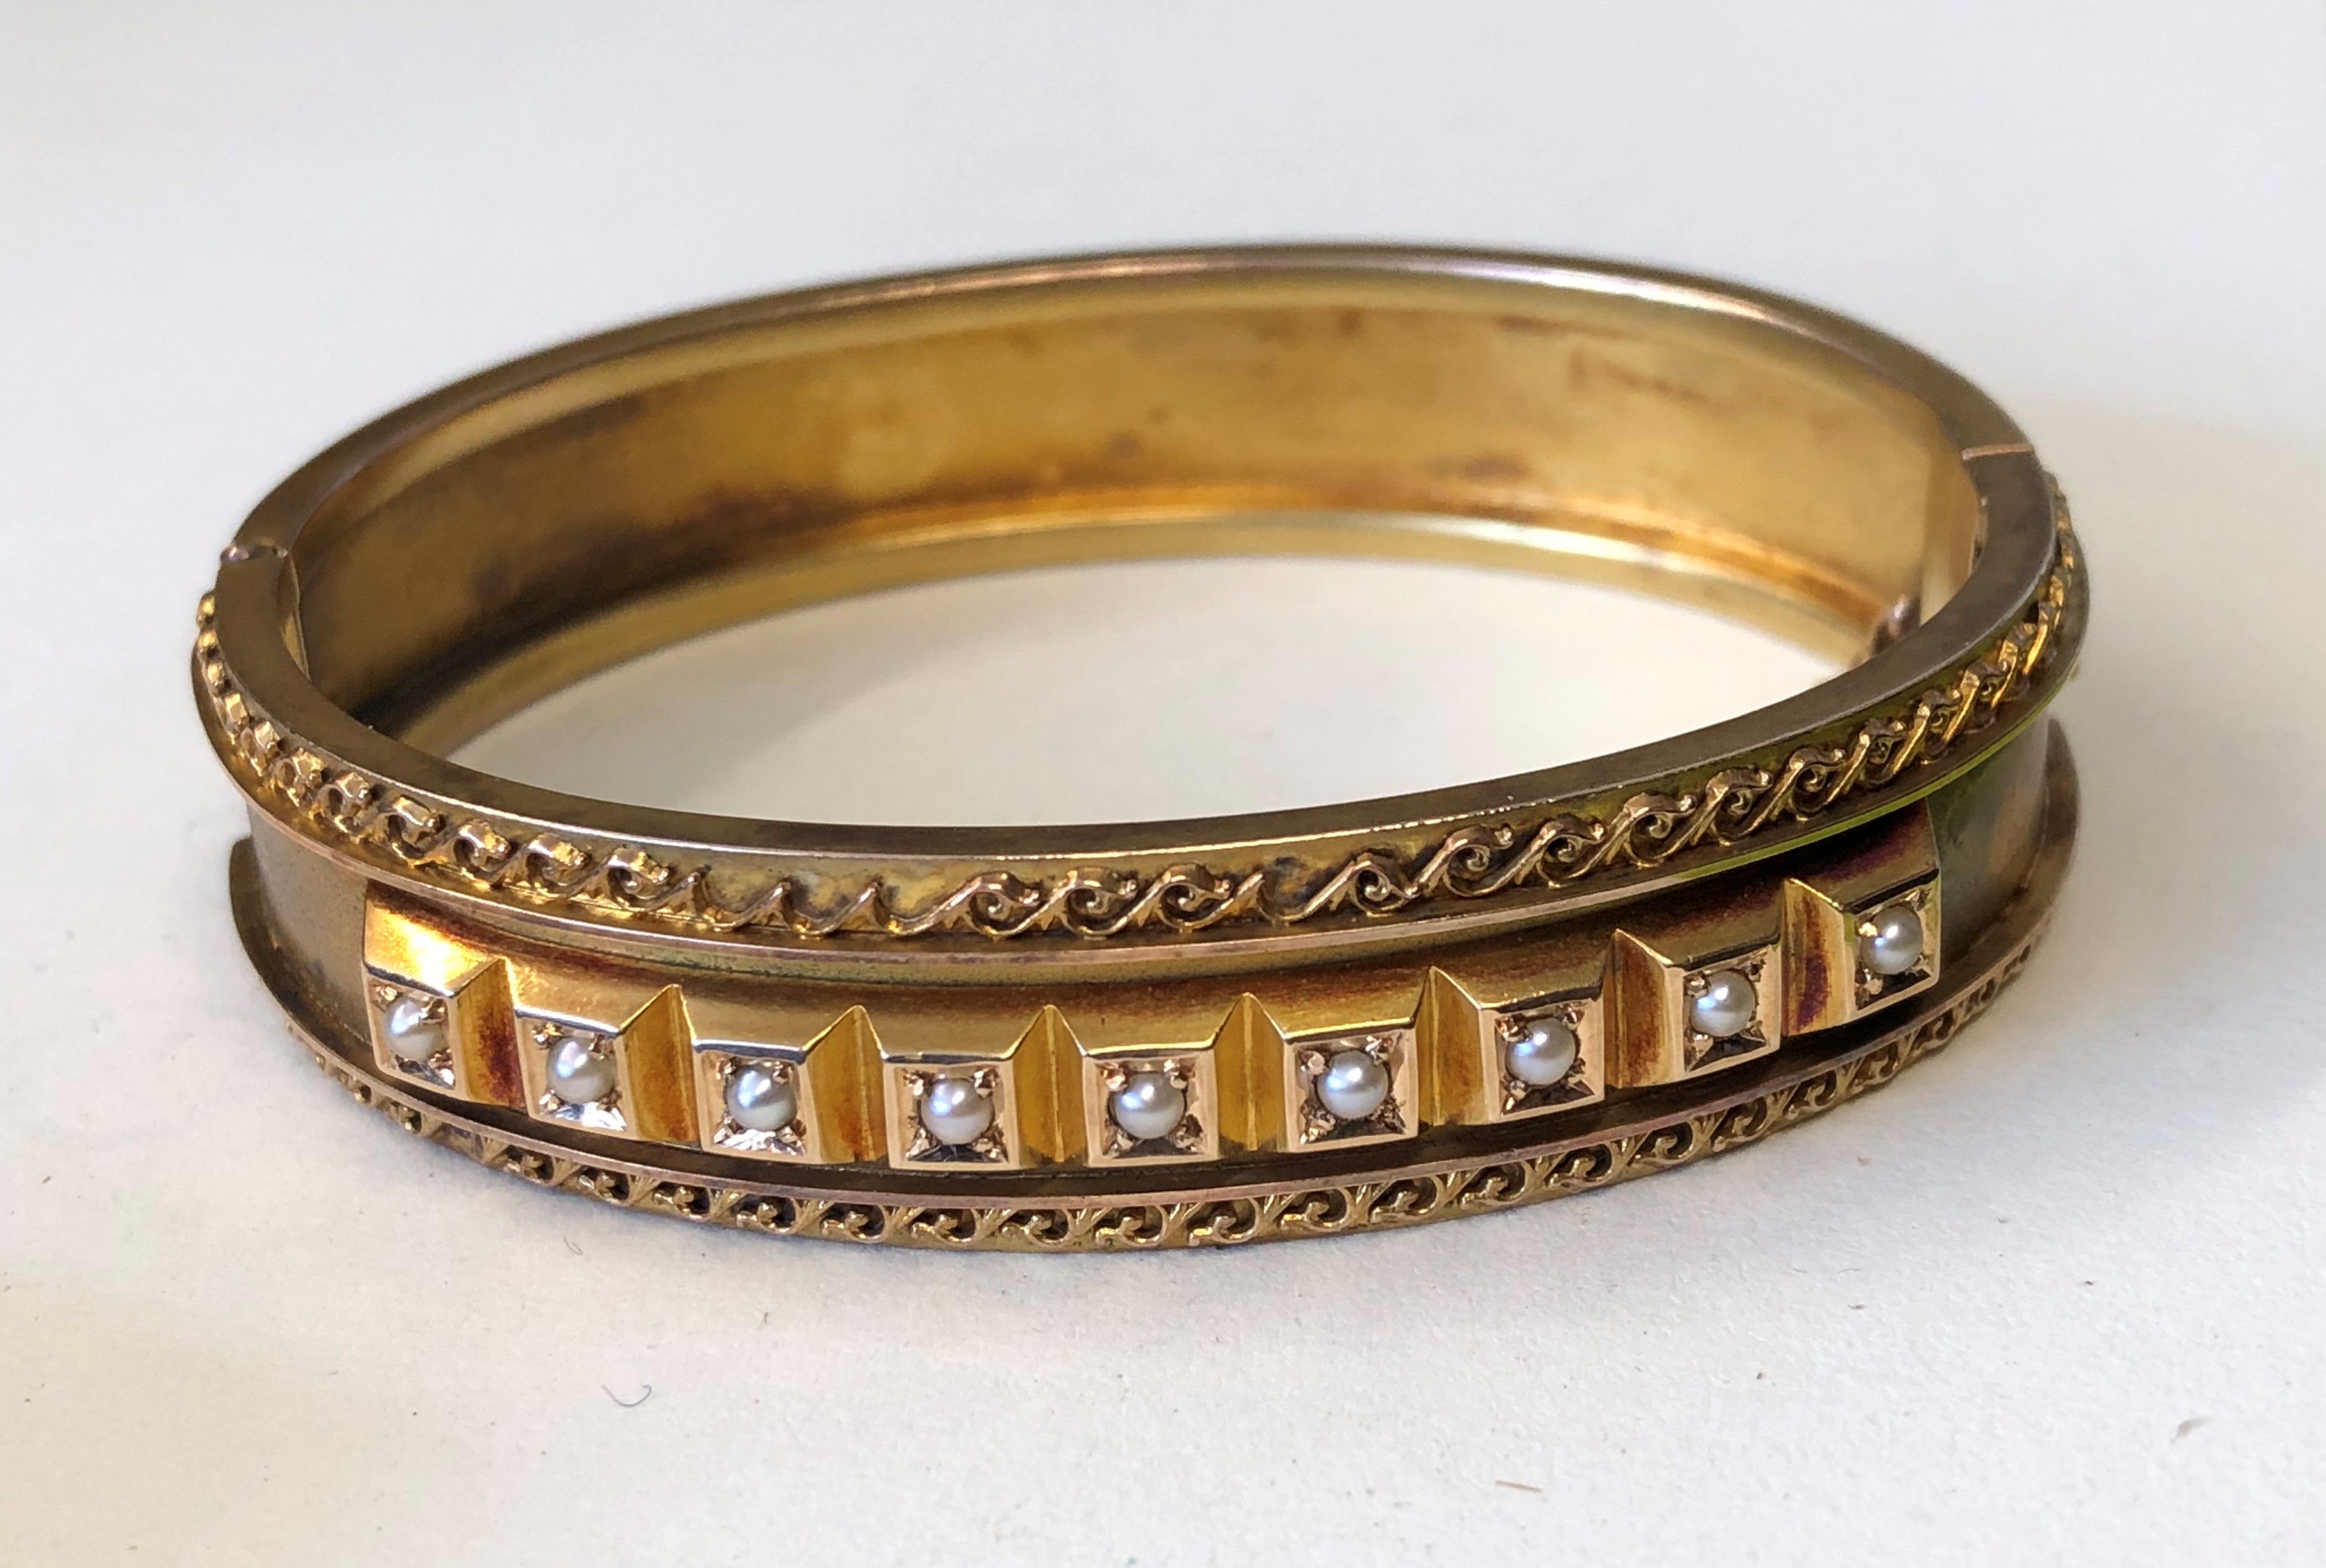 VICTORIAN YELLOW METAL AND SEED PEARL ENCASED BANGLE WITH SAFETY CHAIN 22.